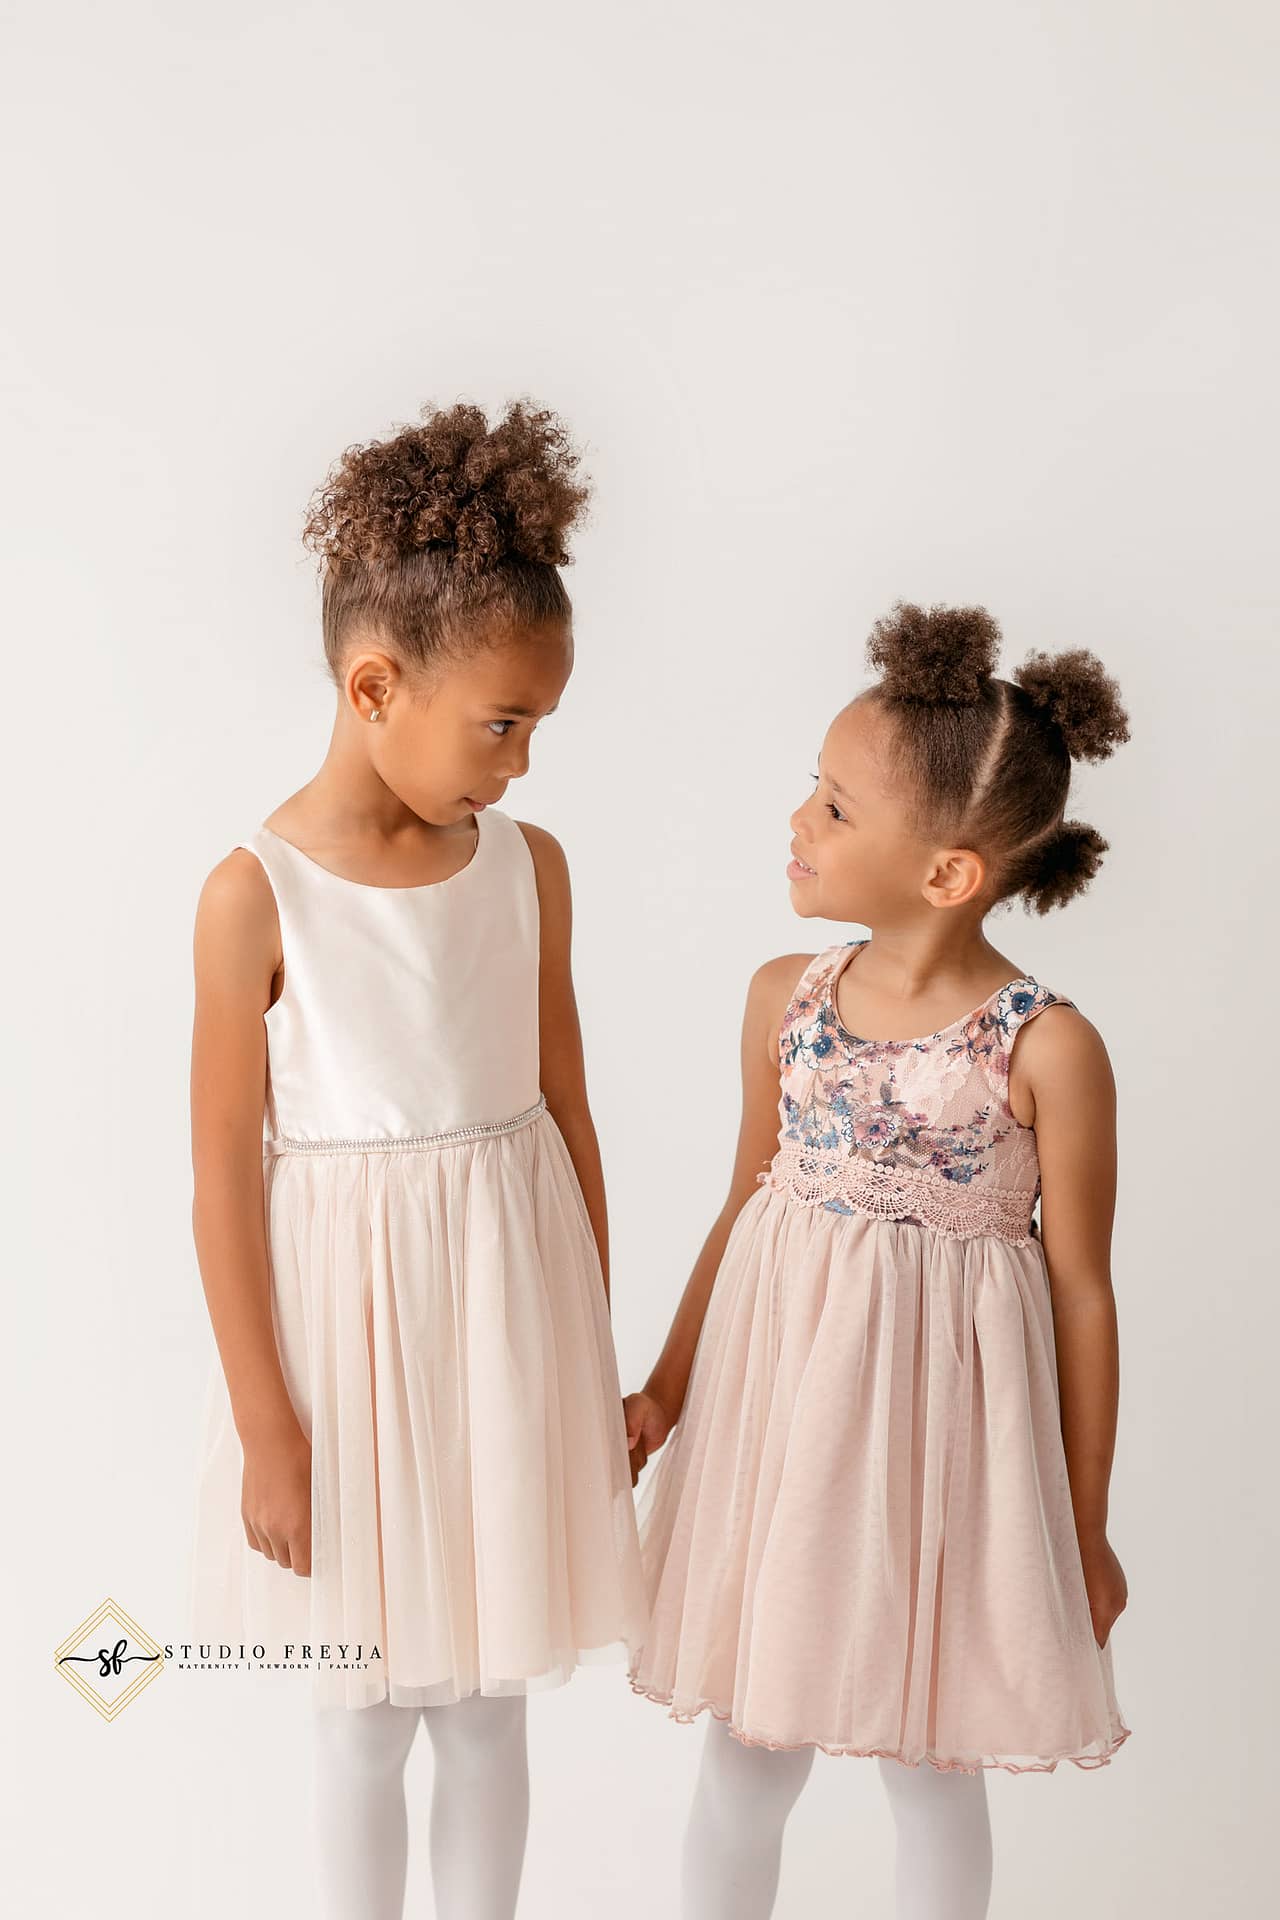 Cute sibling image of sisters looking at each other during maternity session